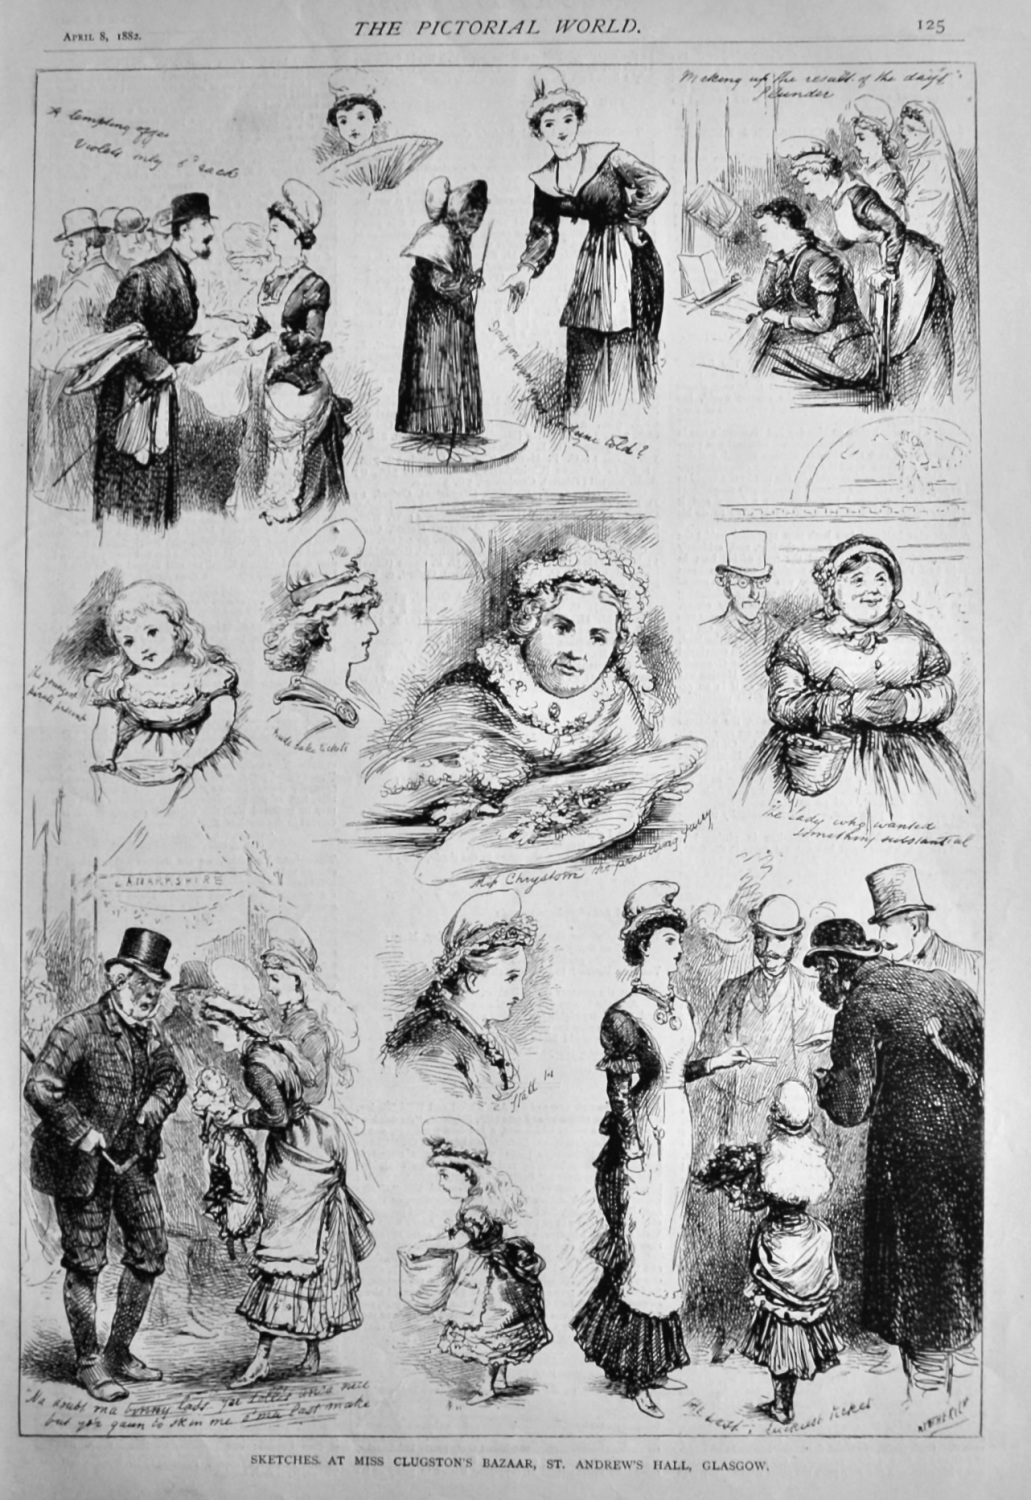 Sketches at Miss Clugston's Bazaar, St. Andrew's Hall, Glasgow.  1882.